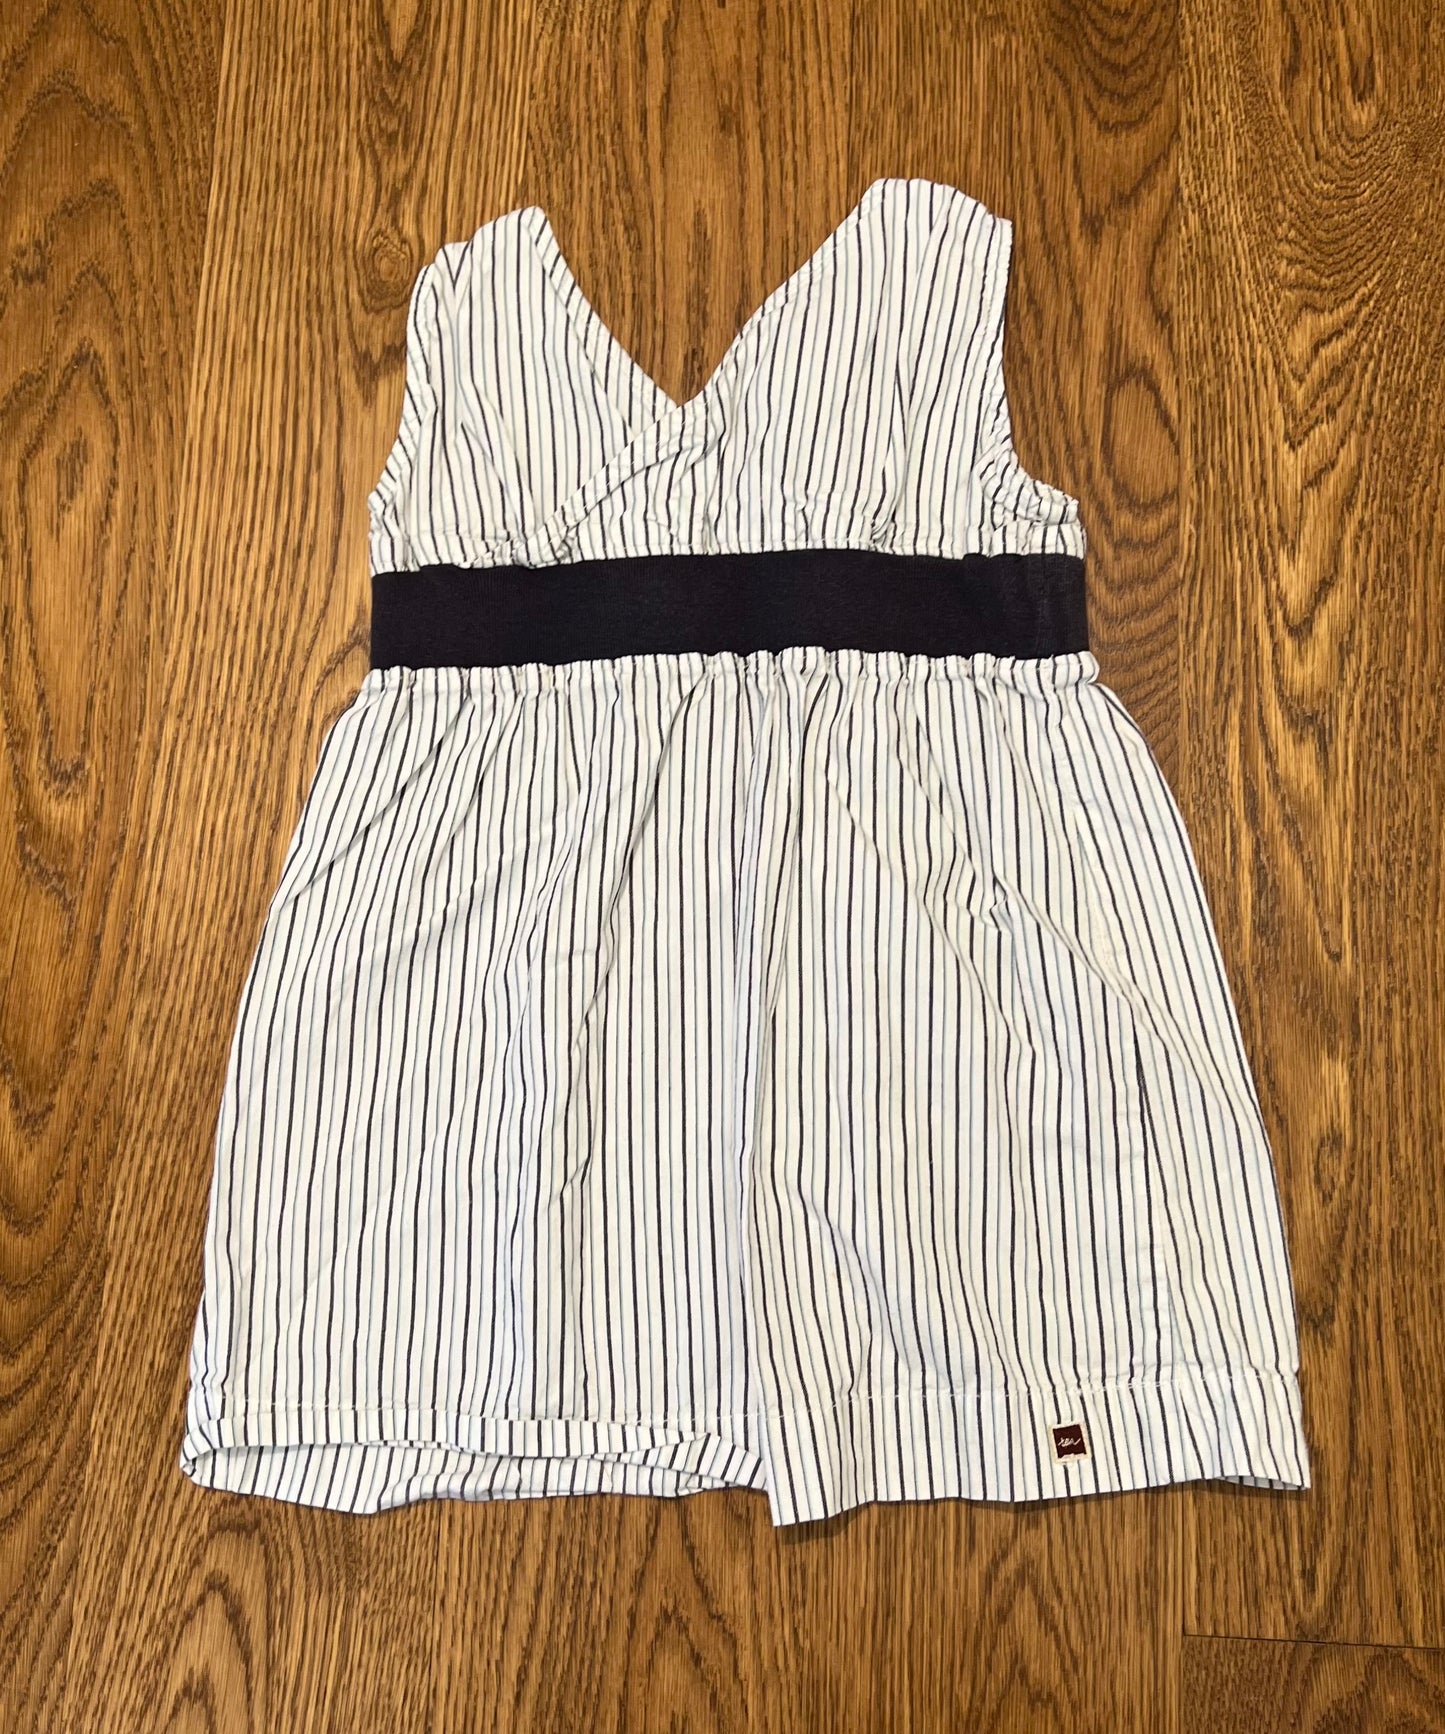 Tea Collection Girls 3T Striped Navy/White Dress